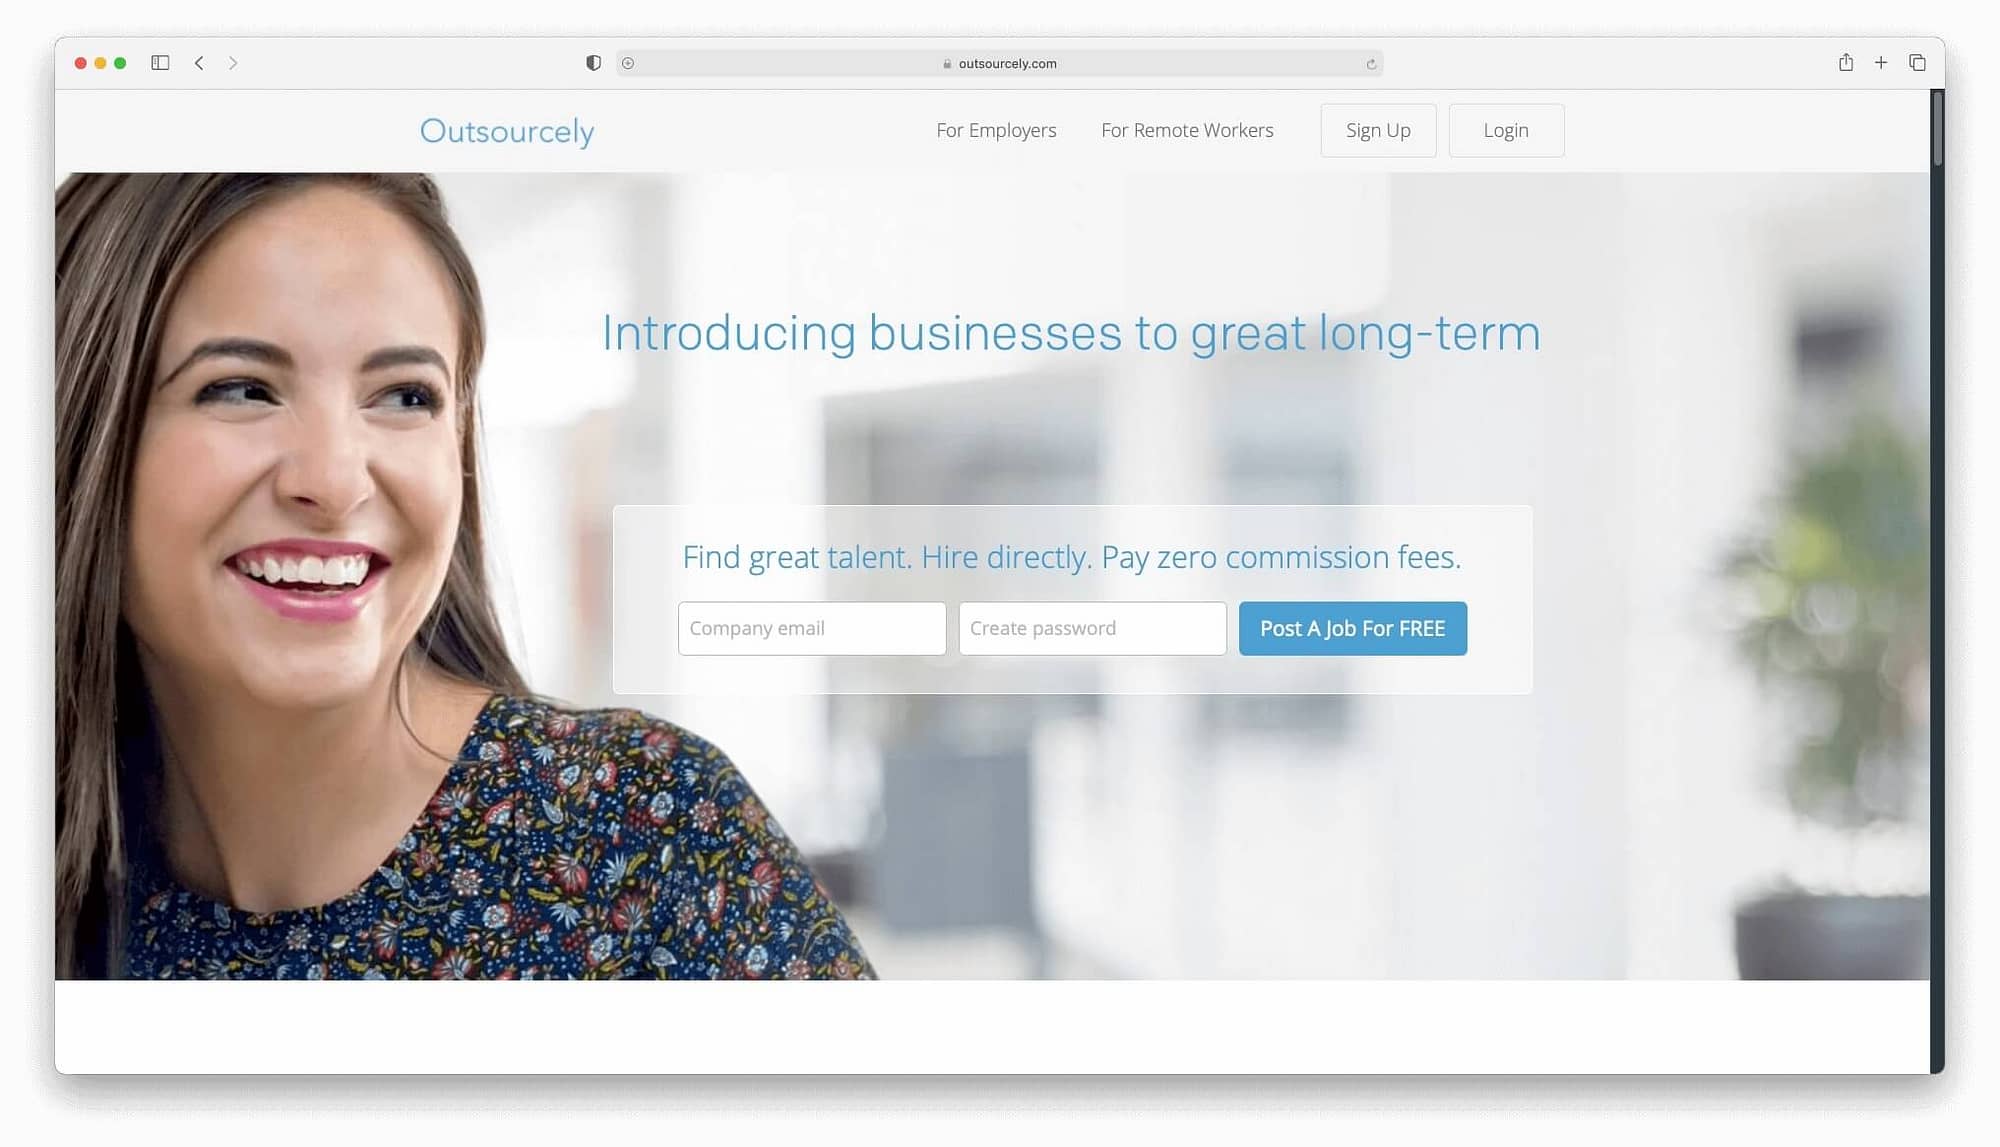 Outsourcely is a platform for seeking remote work online